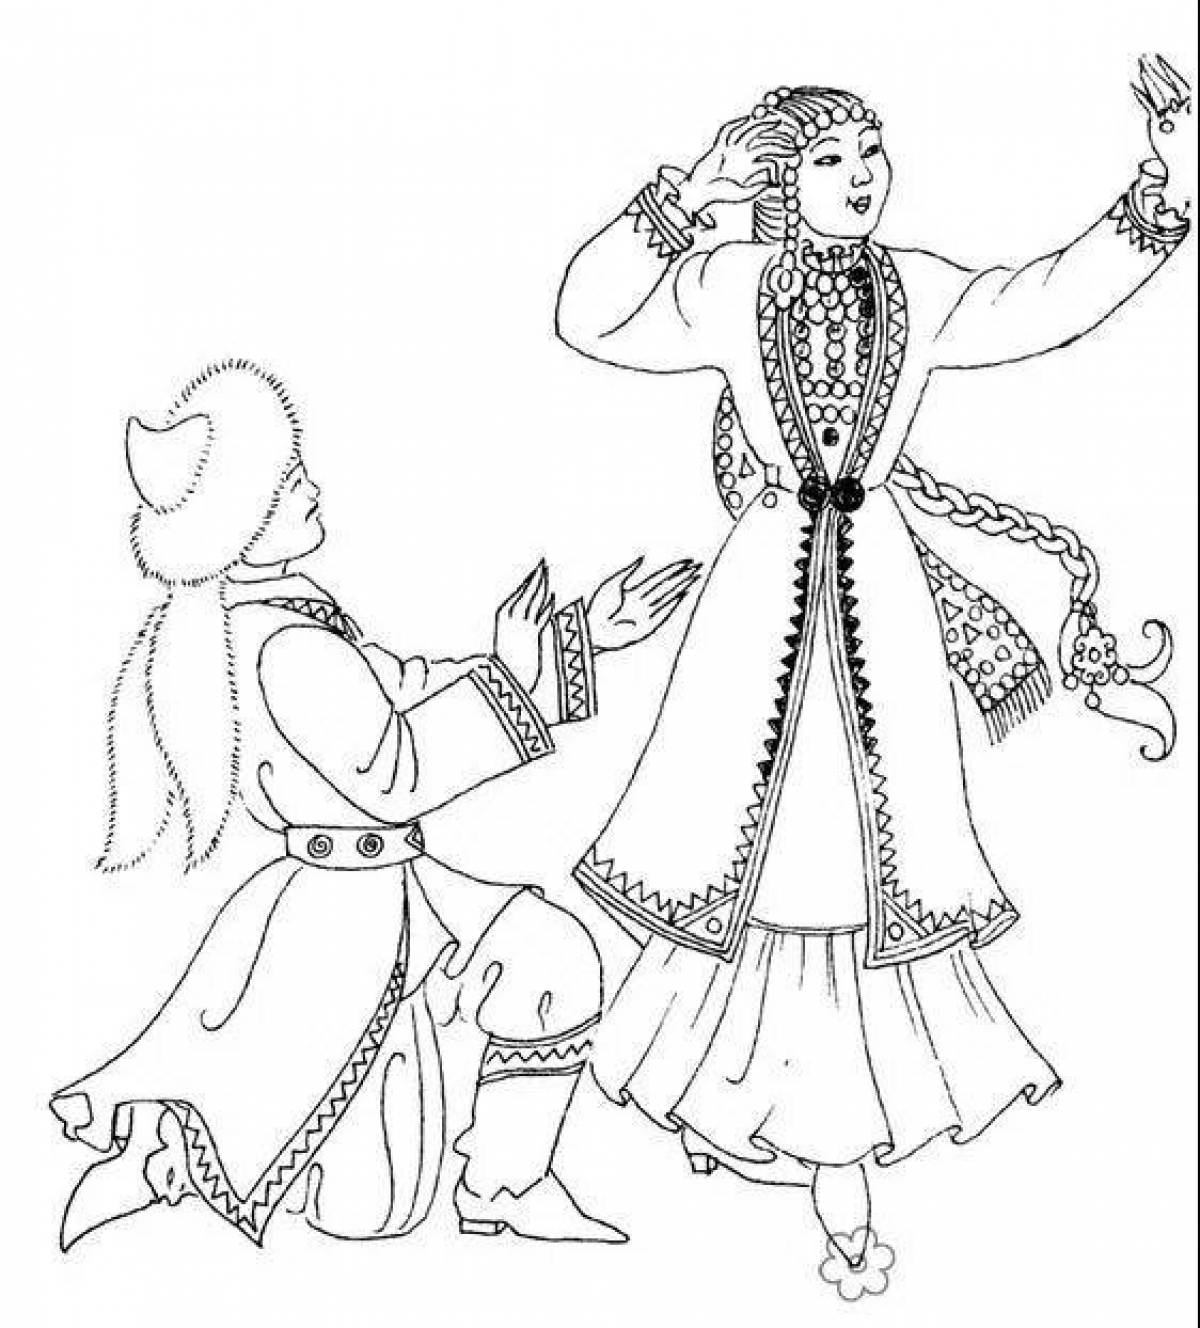 Coloring page glorious Kazakh national clothes